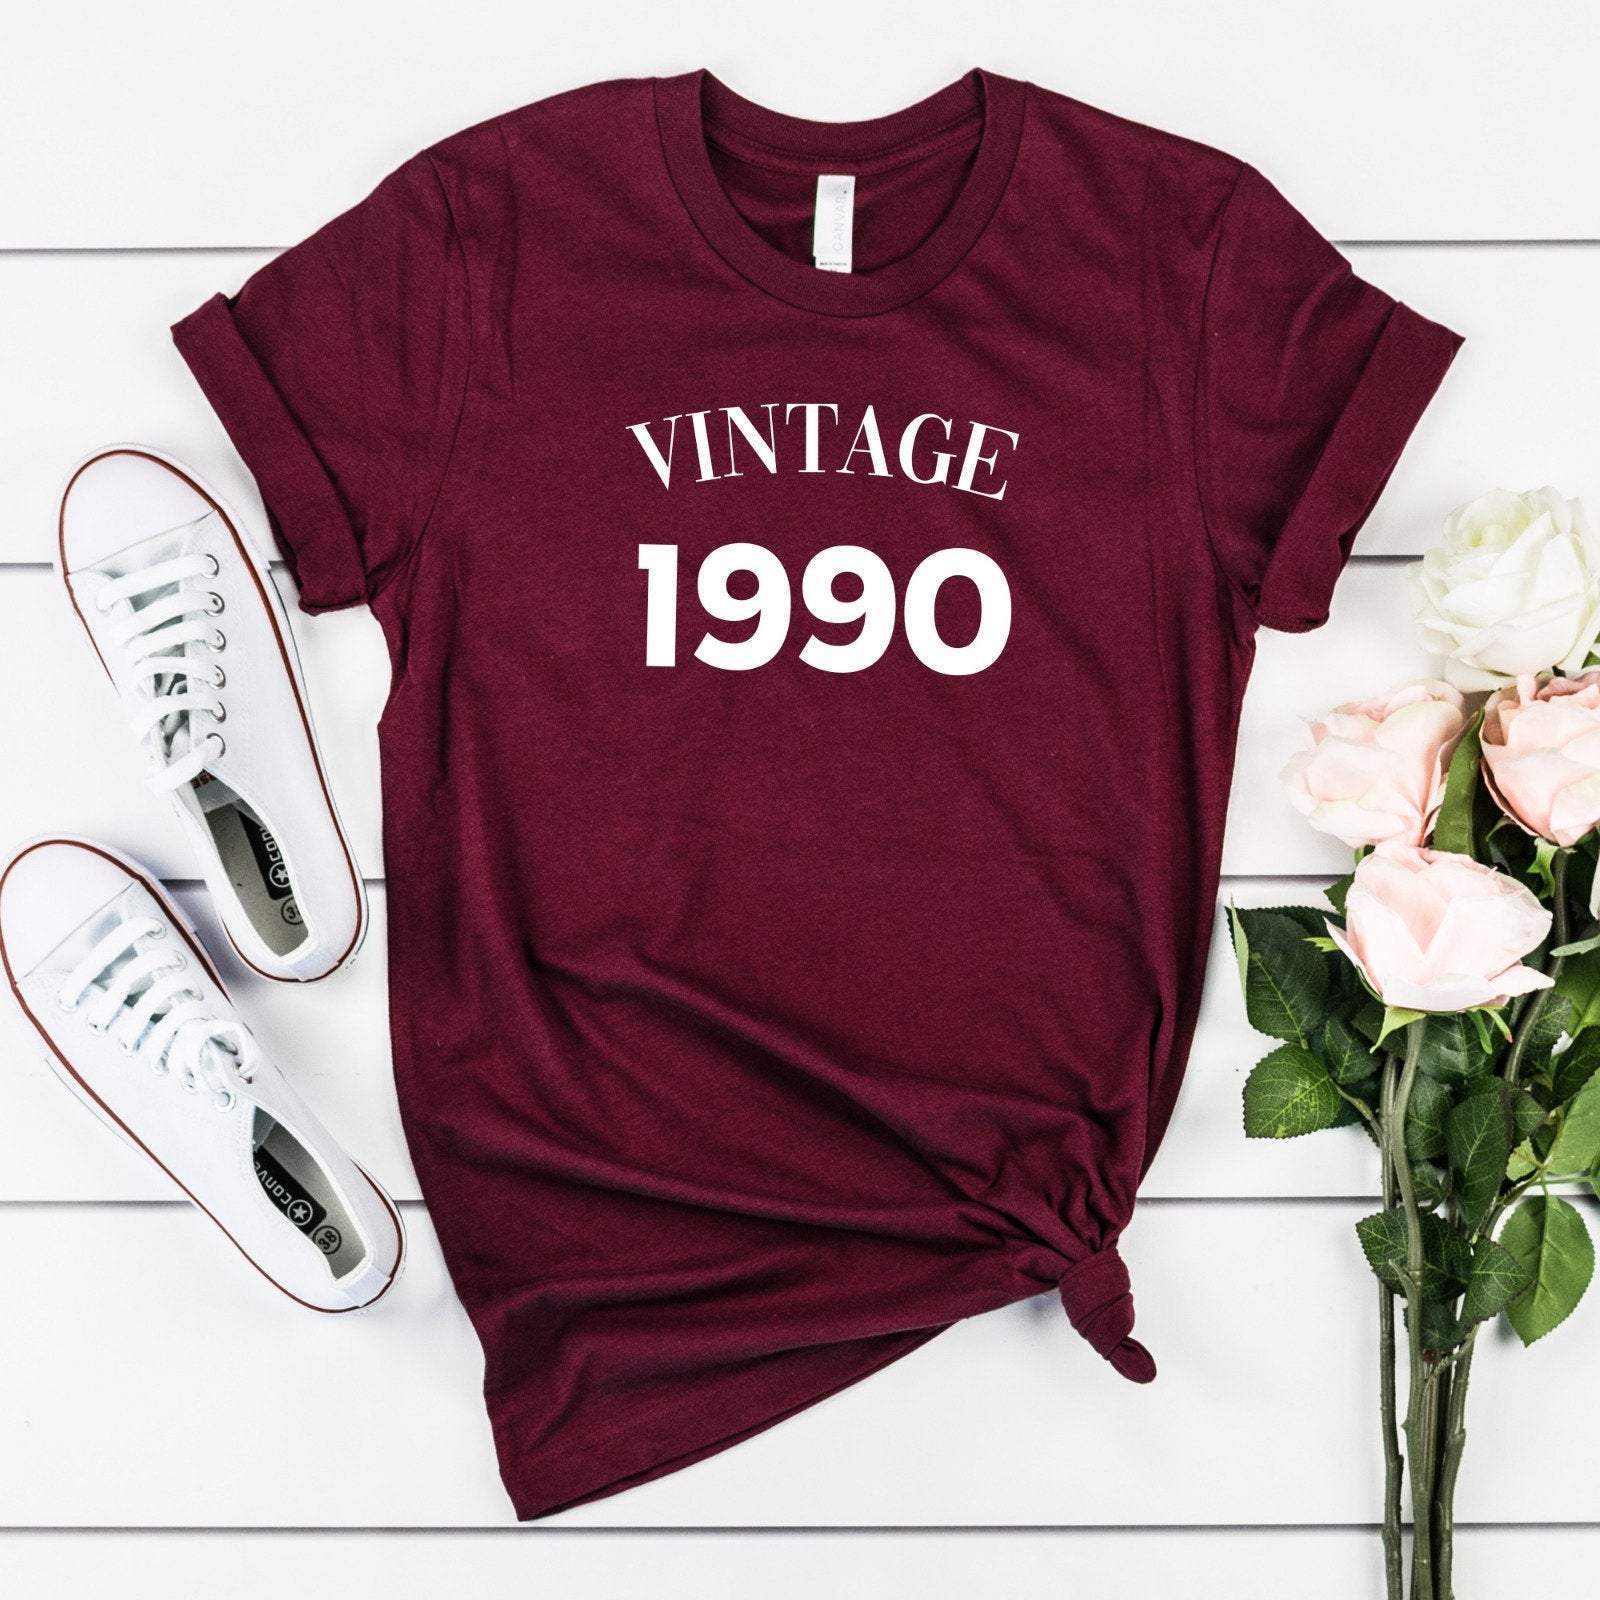 Vintage t-shirt, Birthday t-shirt for him or her, UNISEX, Suitable for all years